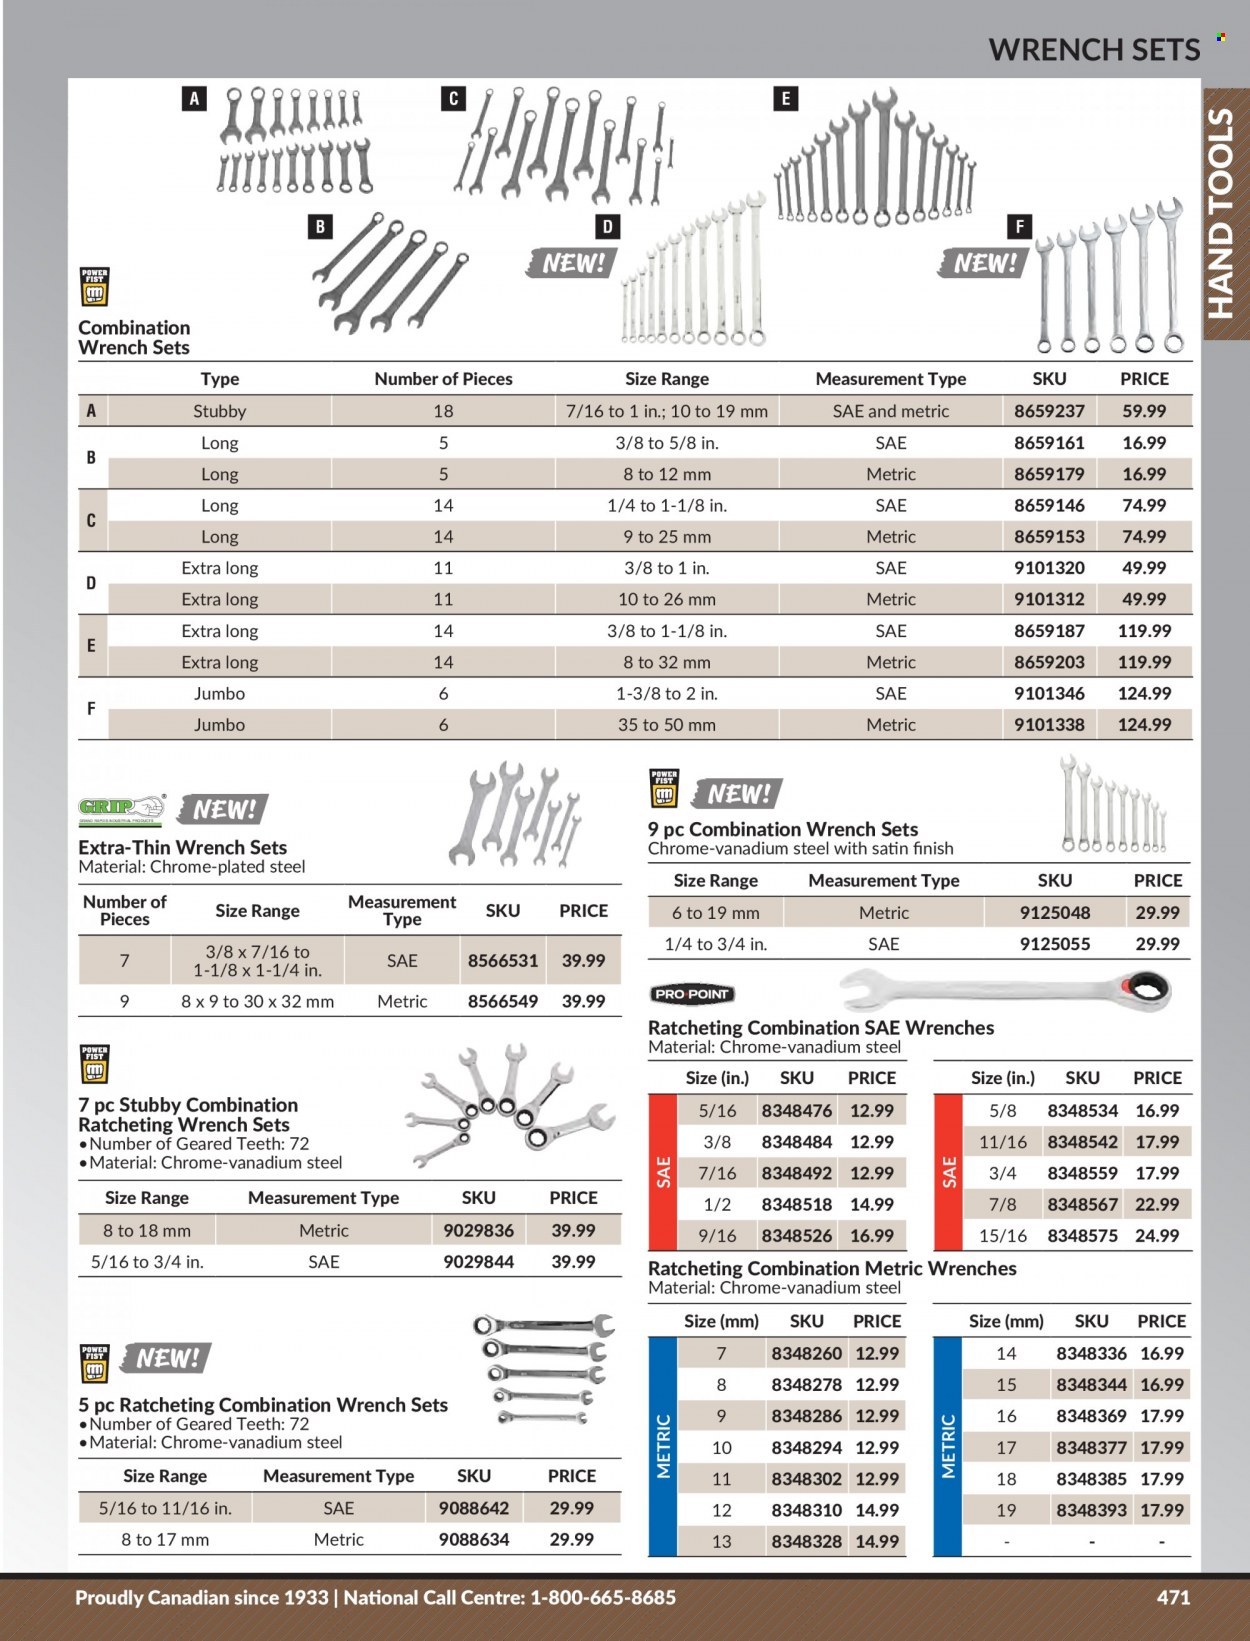 Princess Auto Flyer - Sales products - wrench, hand tools. Page 481.